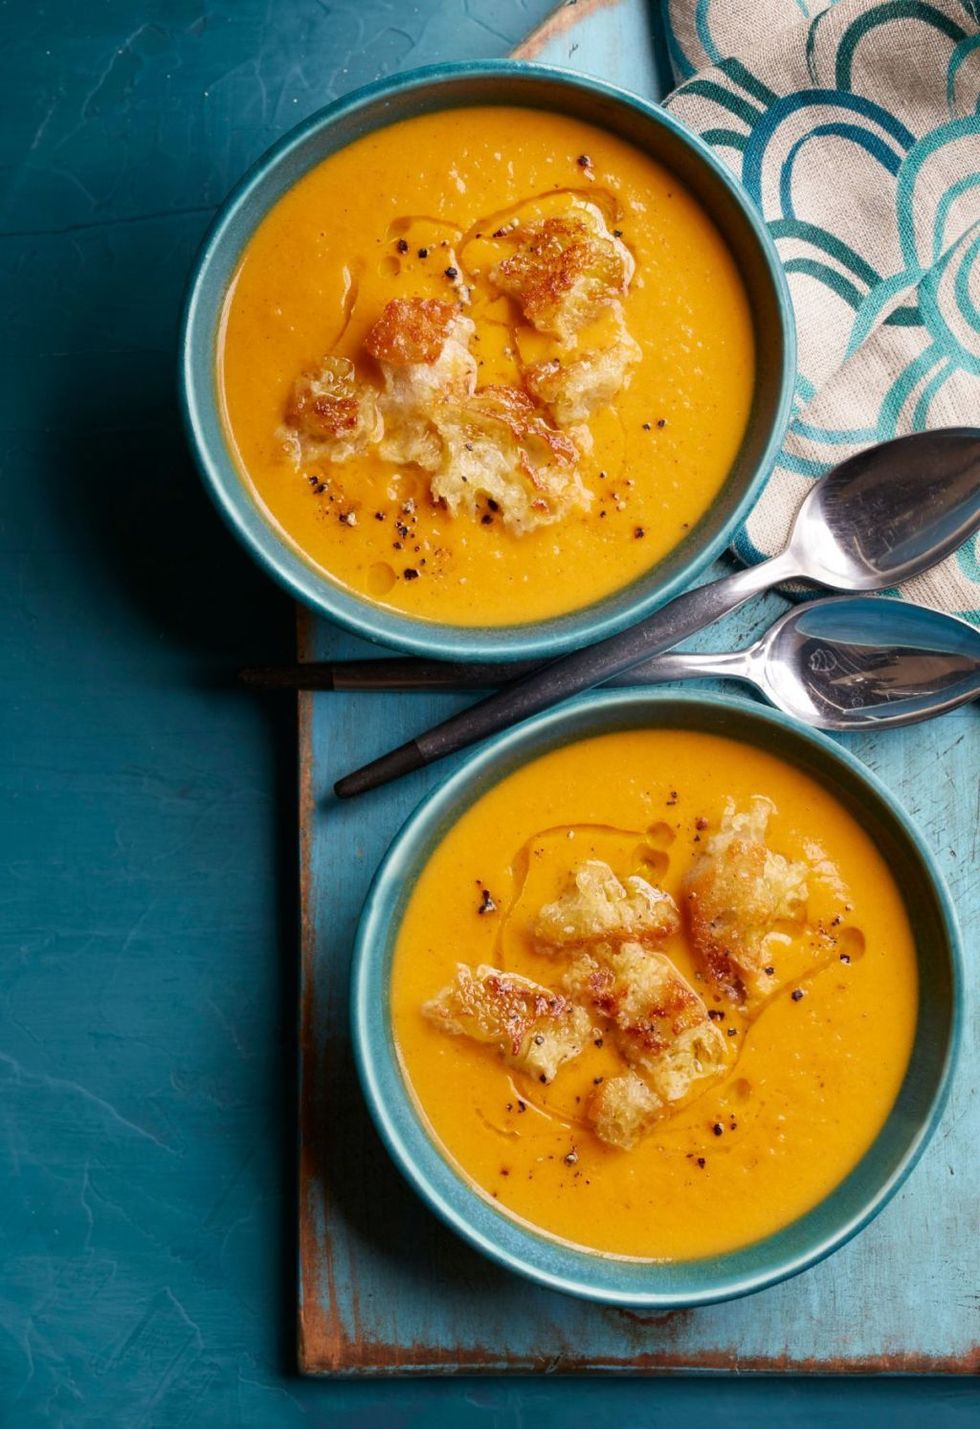 Cinnamon-Spiced Sweet Potato Soup with Maple Croutons